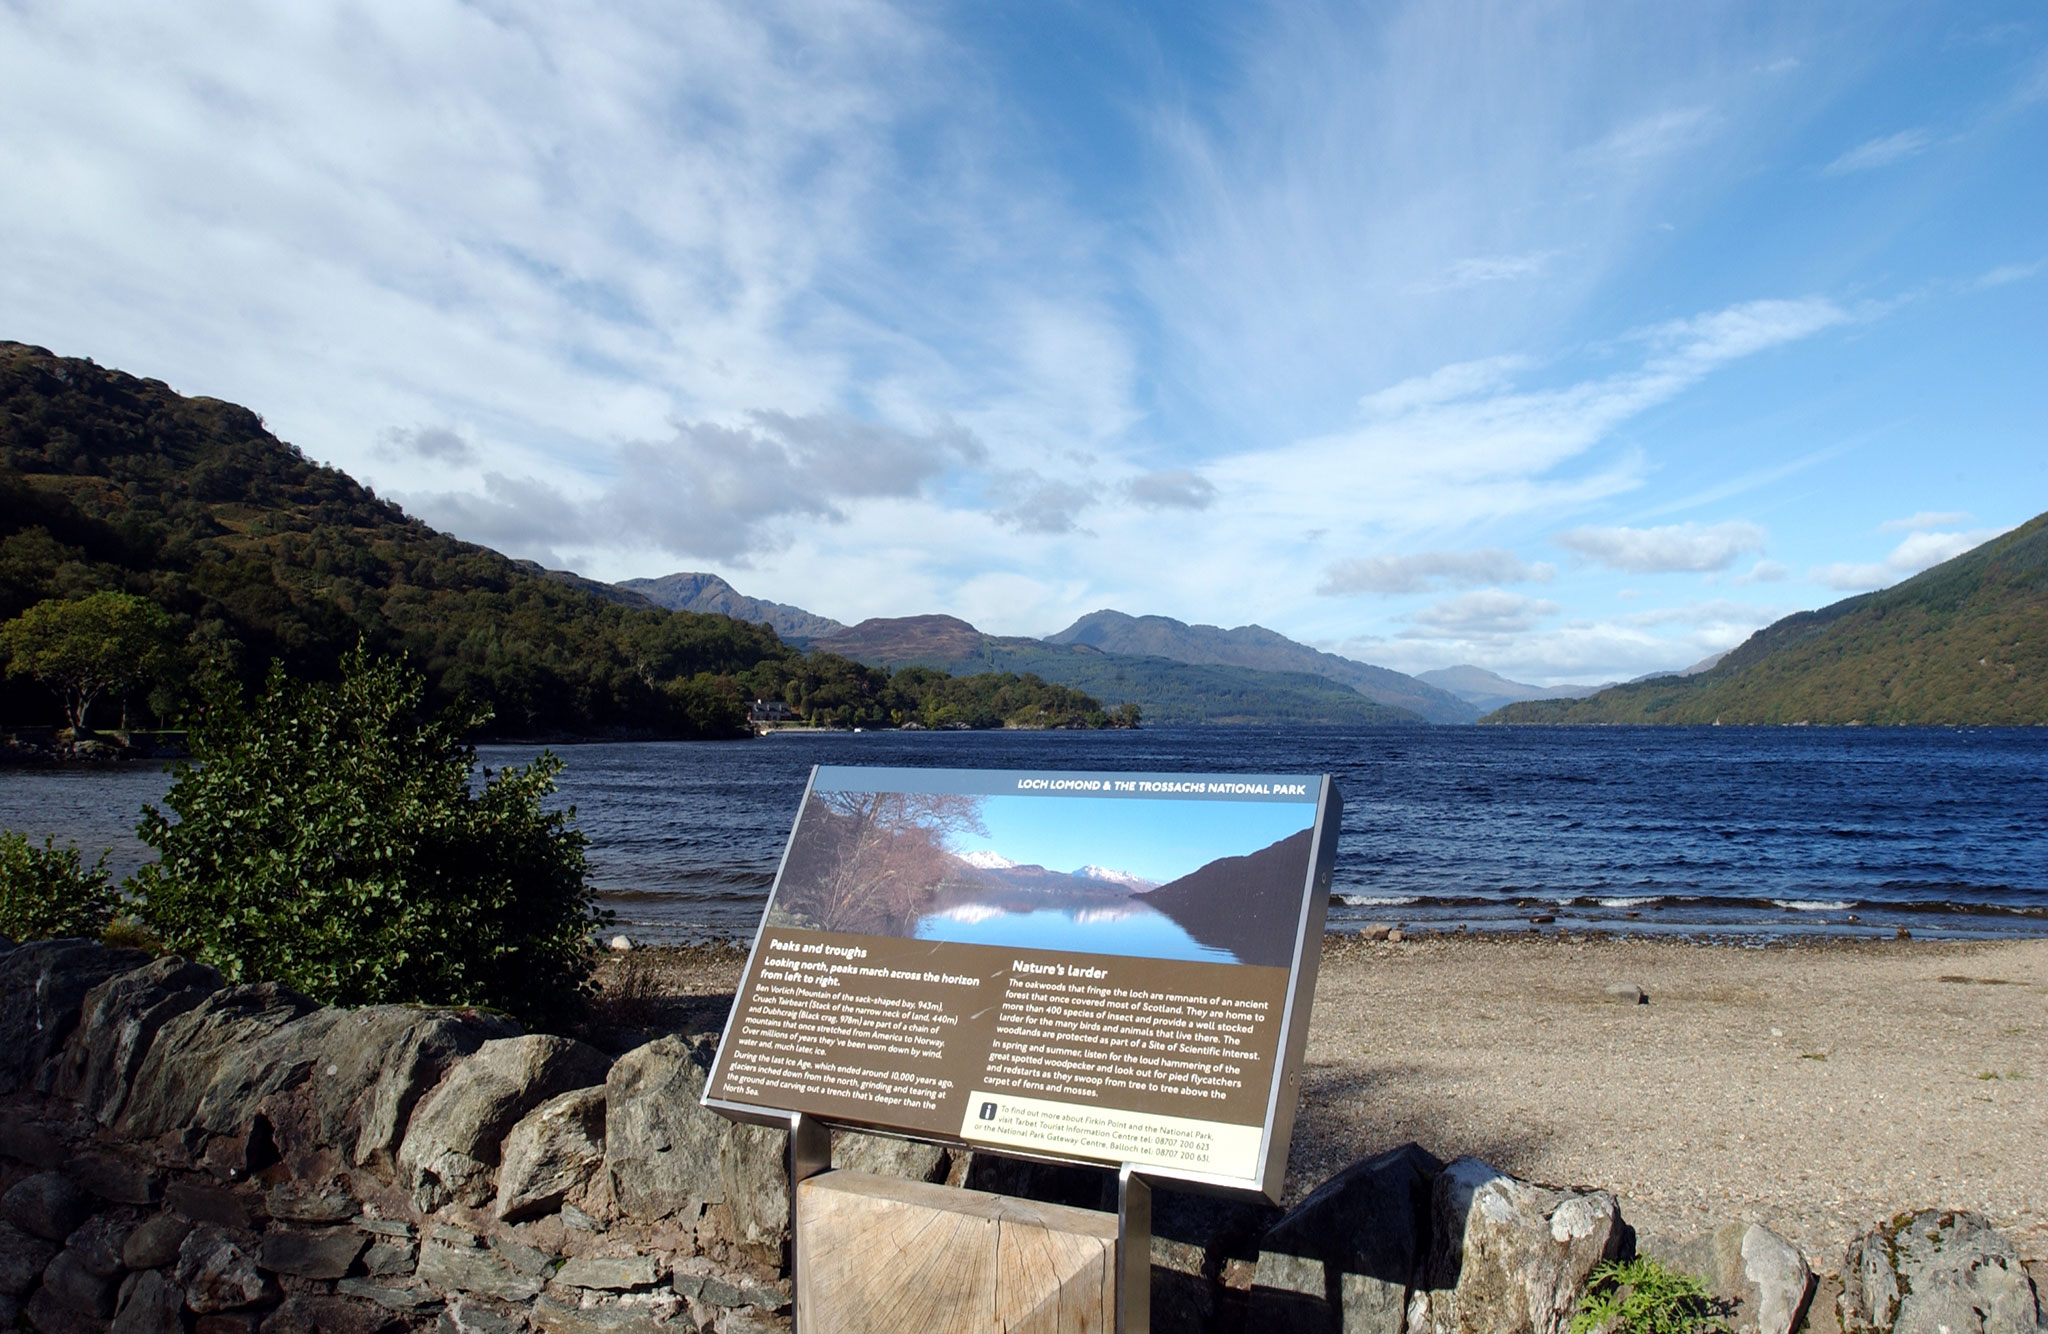 Loch Lomond and The Trossachs National Park signage